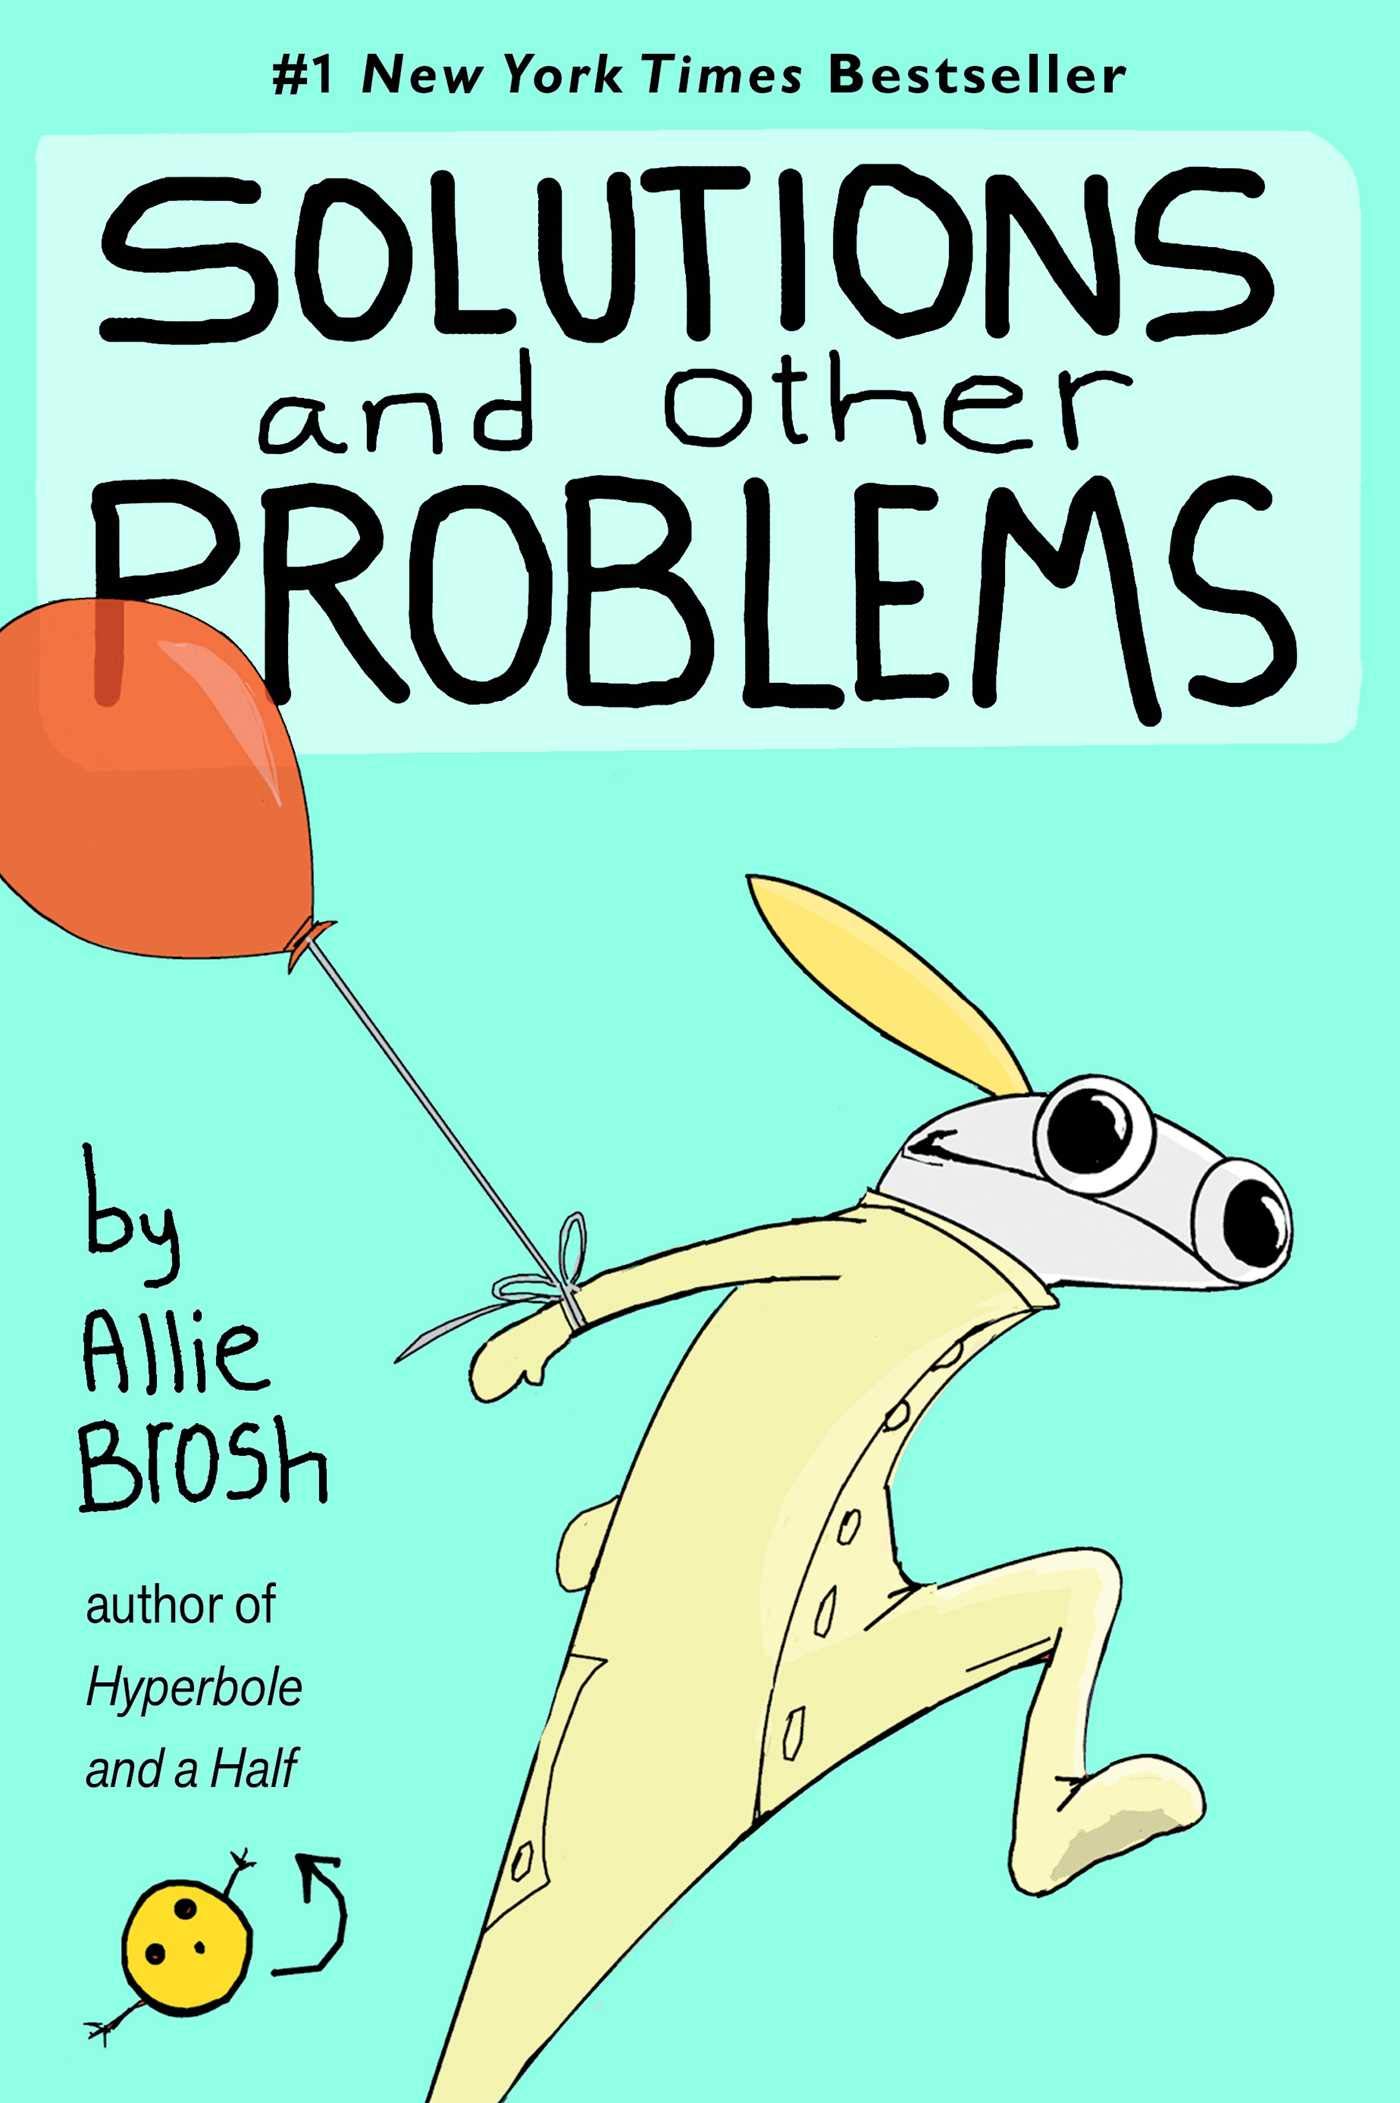 Image for "Solutions and Other Problems"